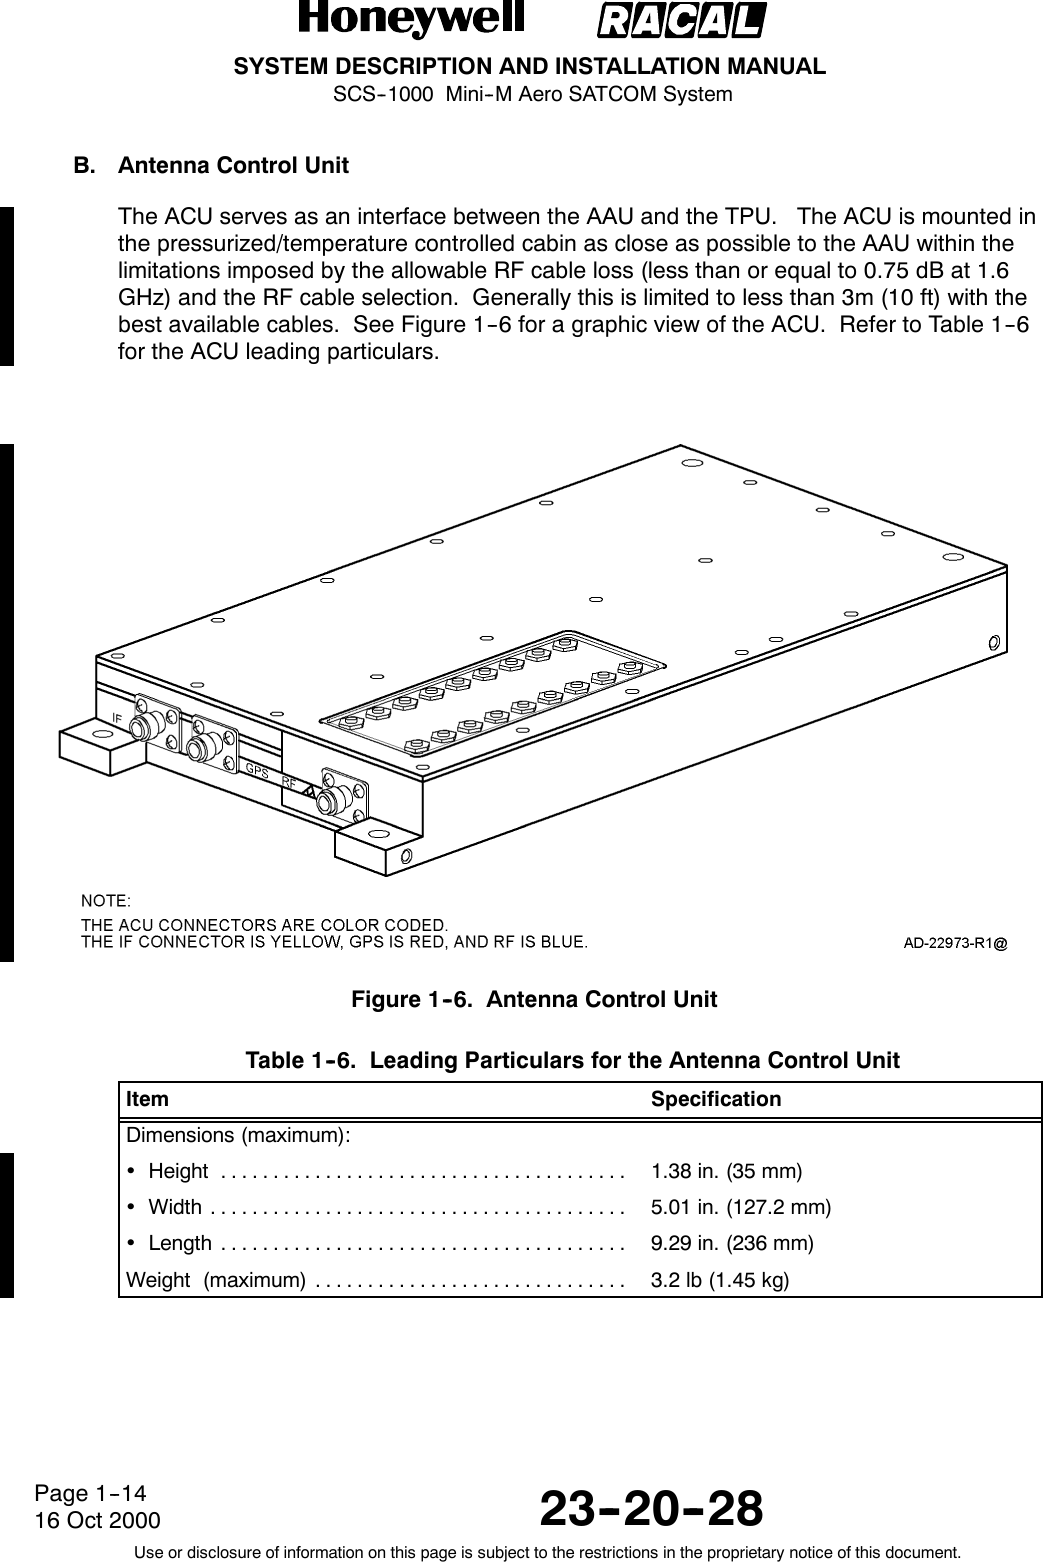 SYSTEM DESCRIPTION AND INSTALLATION MANUALSCS--1000 Mini--M Aero SATCOM System23--20--28Use or disclosure of information on this page is subject to the restrictions in the proprietary notice of this document.Page 1--1416 Oct 2000B. Antenna Control UnitThe ACU serves as an interface between the AAU and the TPU. The ACU is mounted inthe pressurized/temperature controlled cabin as close as possible to the AAU within thelimitations imposed by the allowable RF cable loss (less than or equal to 0.75 dB at 1.6GHz) and the RF cable selection. Generally this is limited to less than 3m (10 ft) with thebest available cables. See Figure 1--6 for a graphic view of the ACU. Refer to Table 1--6for the ACU leading particulars.Figure 1--6. Antenna Control UnitTable 1--6. Leading Particulars for the Antenna Control UnitItem SpecificationDimensions (maximum):Height ....................................... 1.38 in. (35 mm)Width ........................................ 5.01 in. (127.2 mm)Length ....................................... 9.29 in. (236 mm)Weight (maximum) .............................. 3.2 lb (1.45 kg)